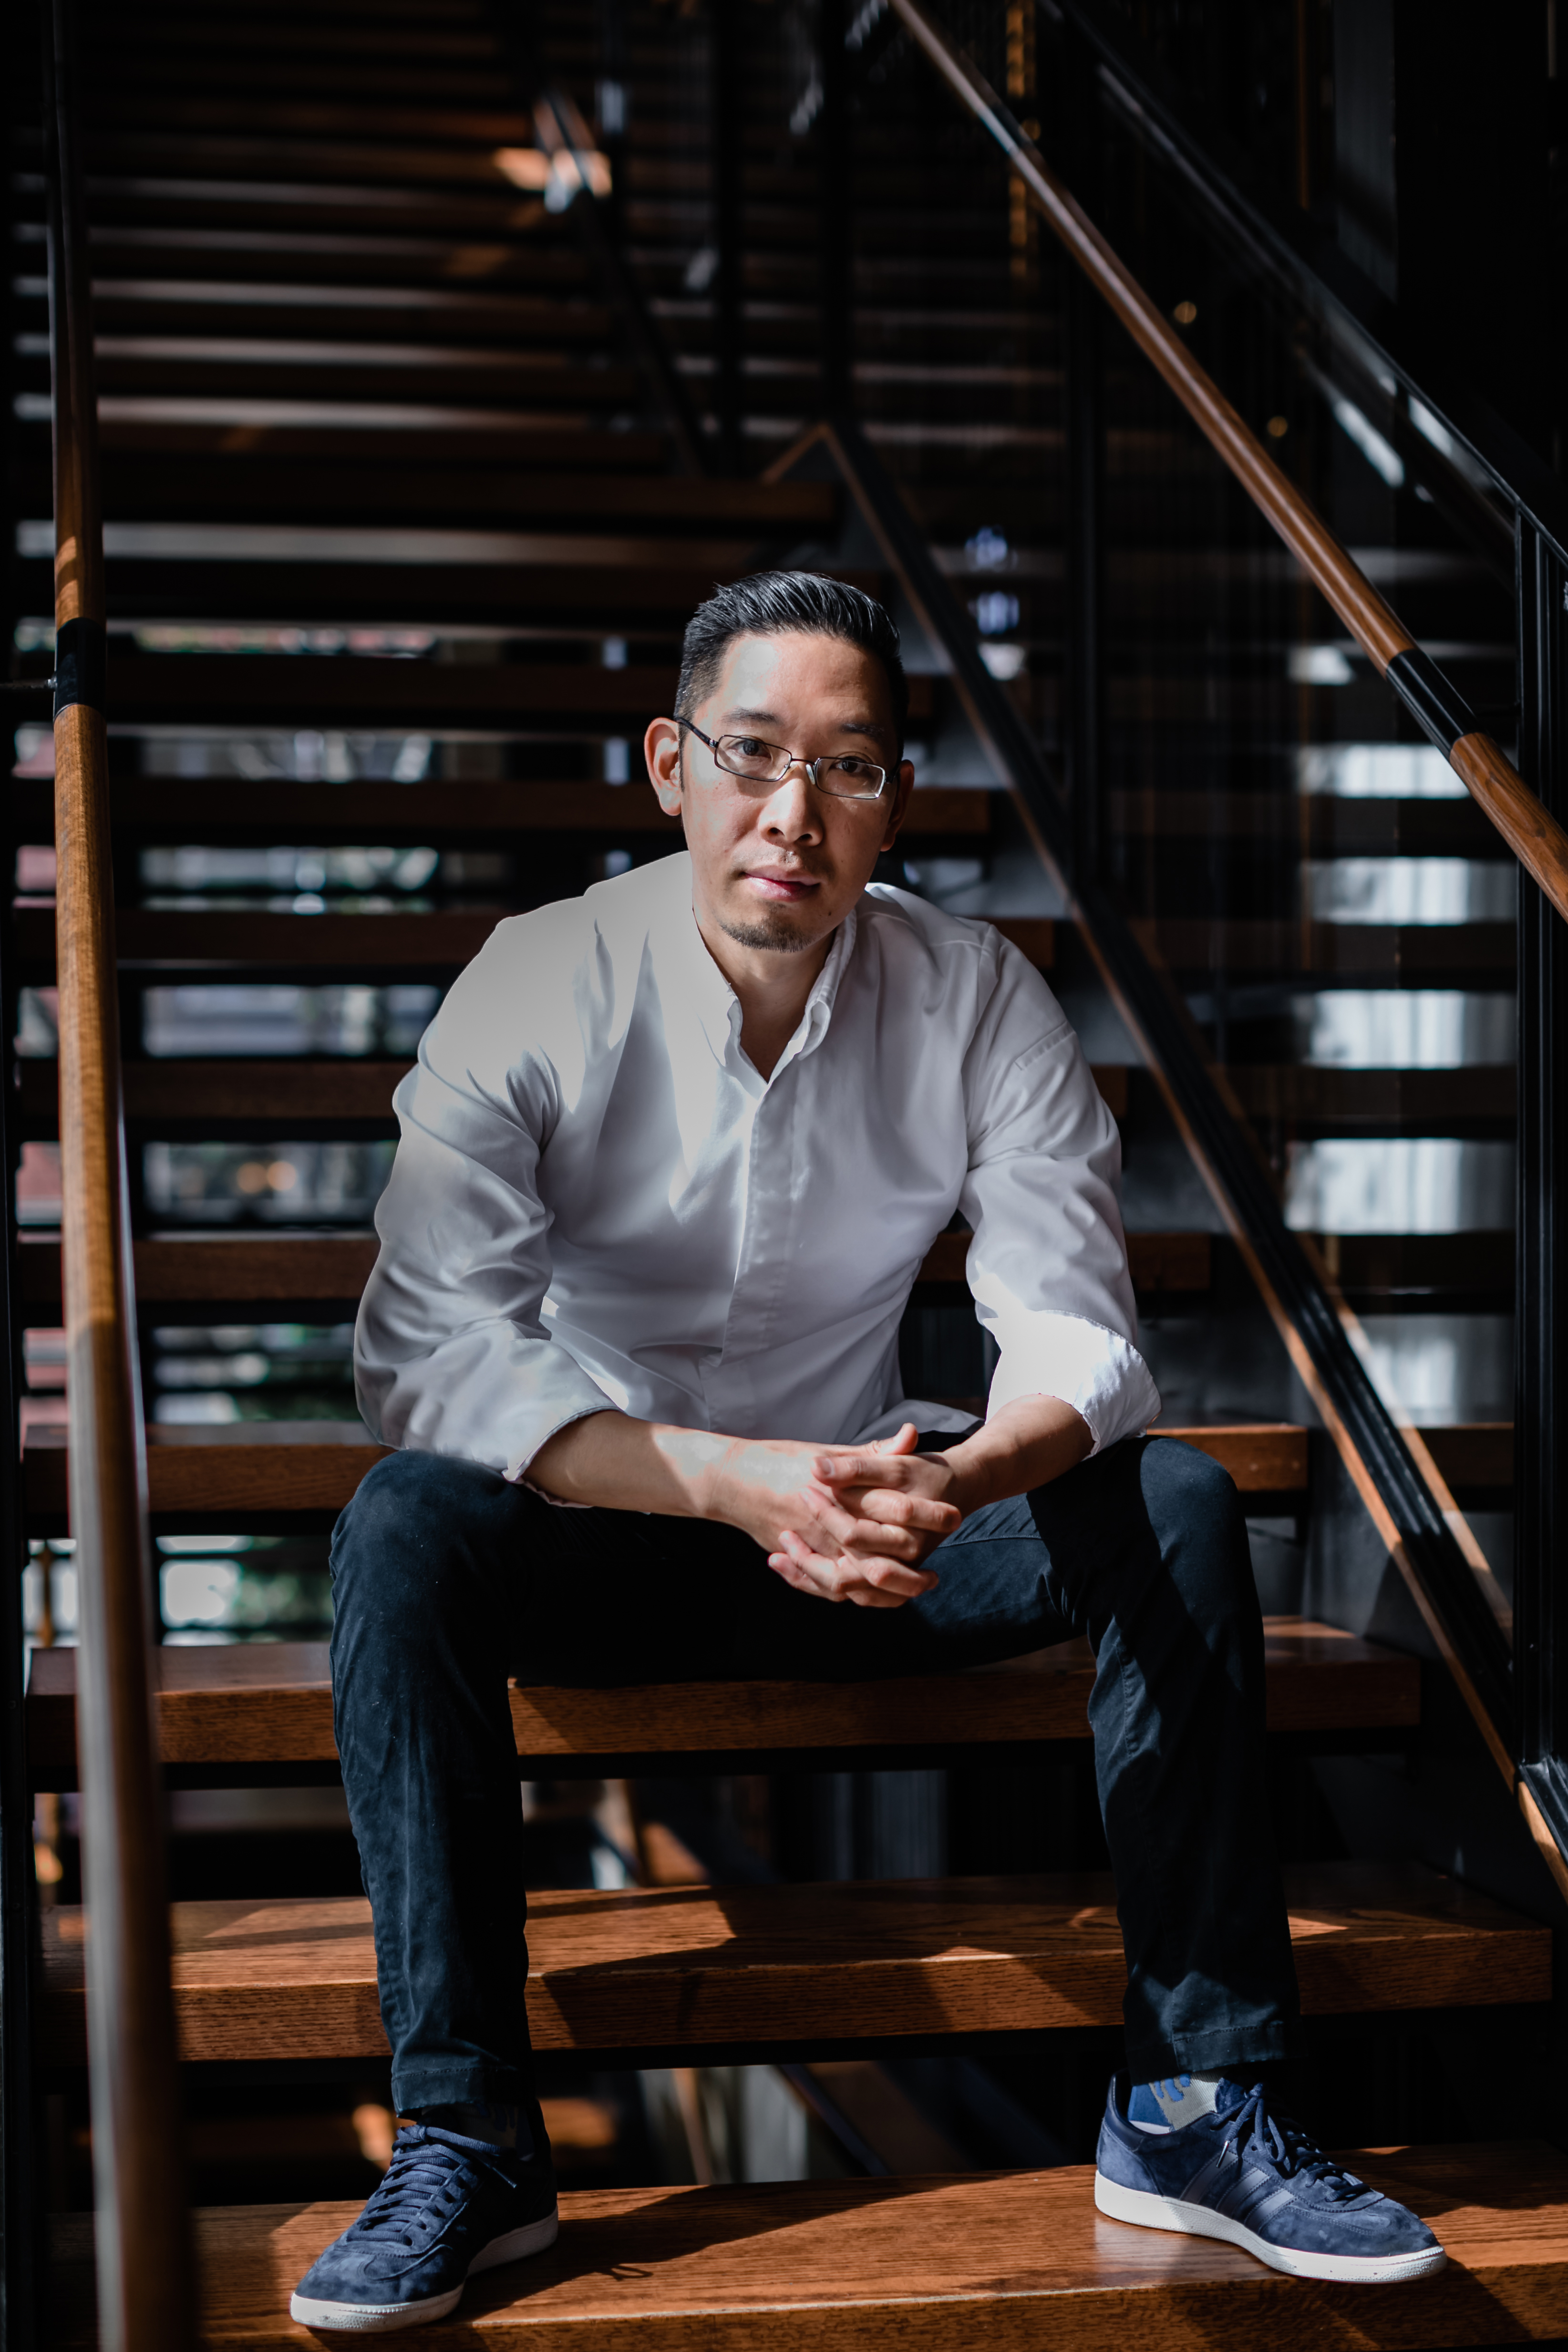 A portrait shot of an Asian-American chef in a white coat sitting on a flight of stairs.